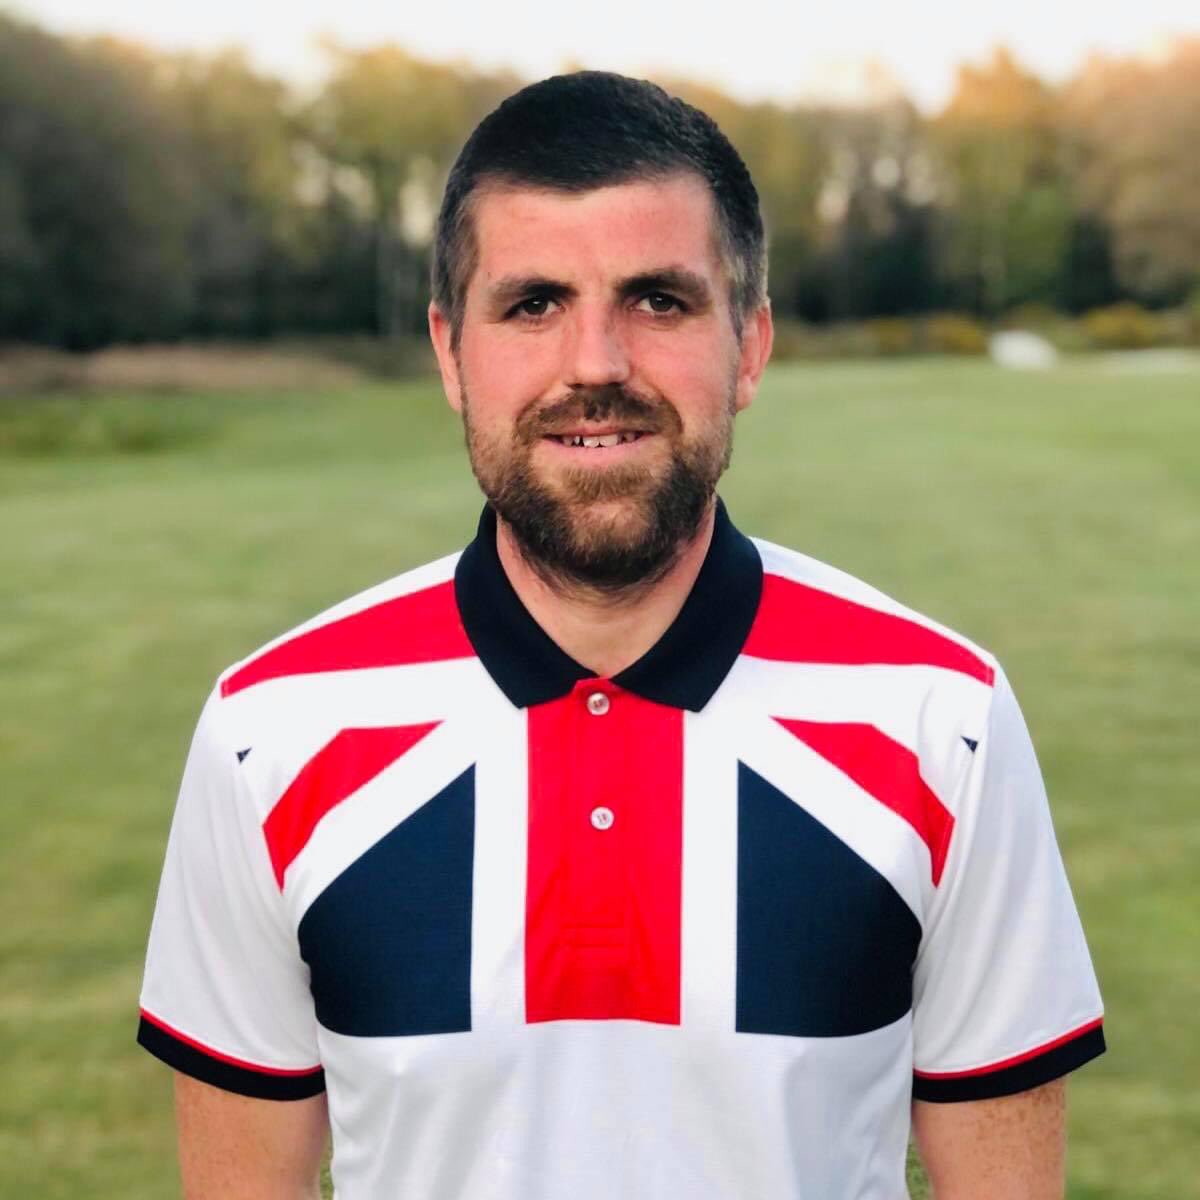 🇬🇧 Proud to be named @ukfootgolf captain for The Euro 2021 in Hungary 🇭🇺 An amazing opportunity and can’t wait to get started ❤️🇬🇧